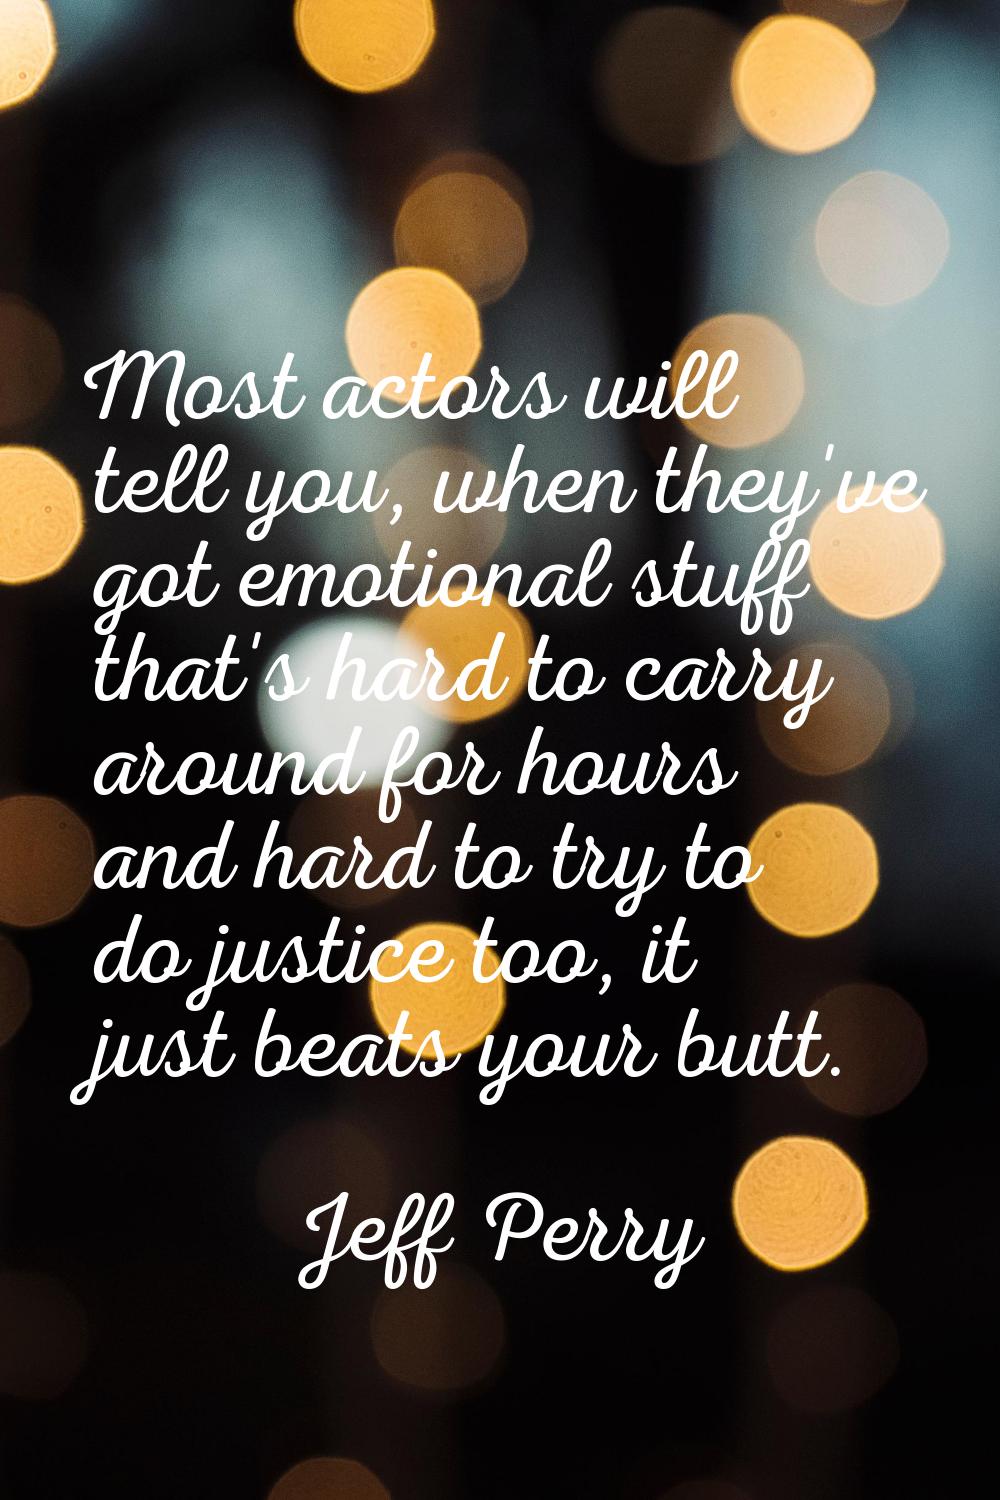 Most actors will tell you, when they've got emotional stuff that's hard to carry around for hours a